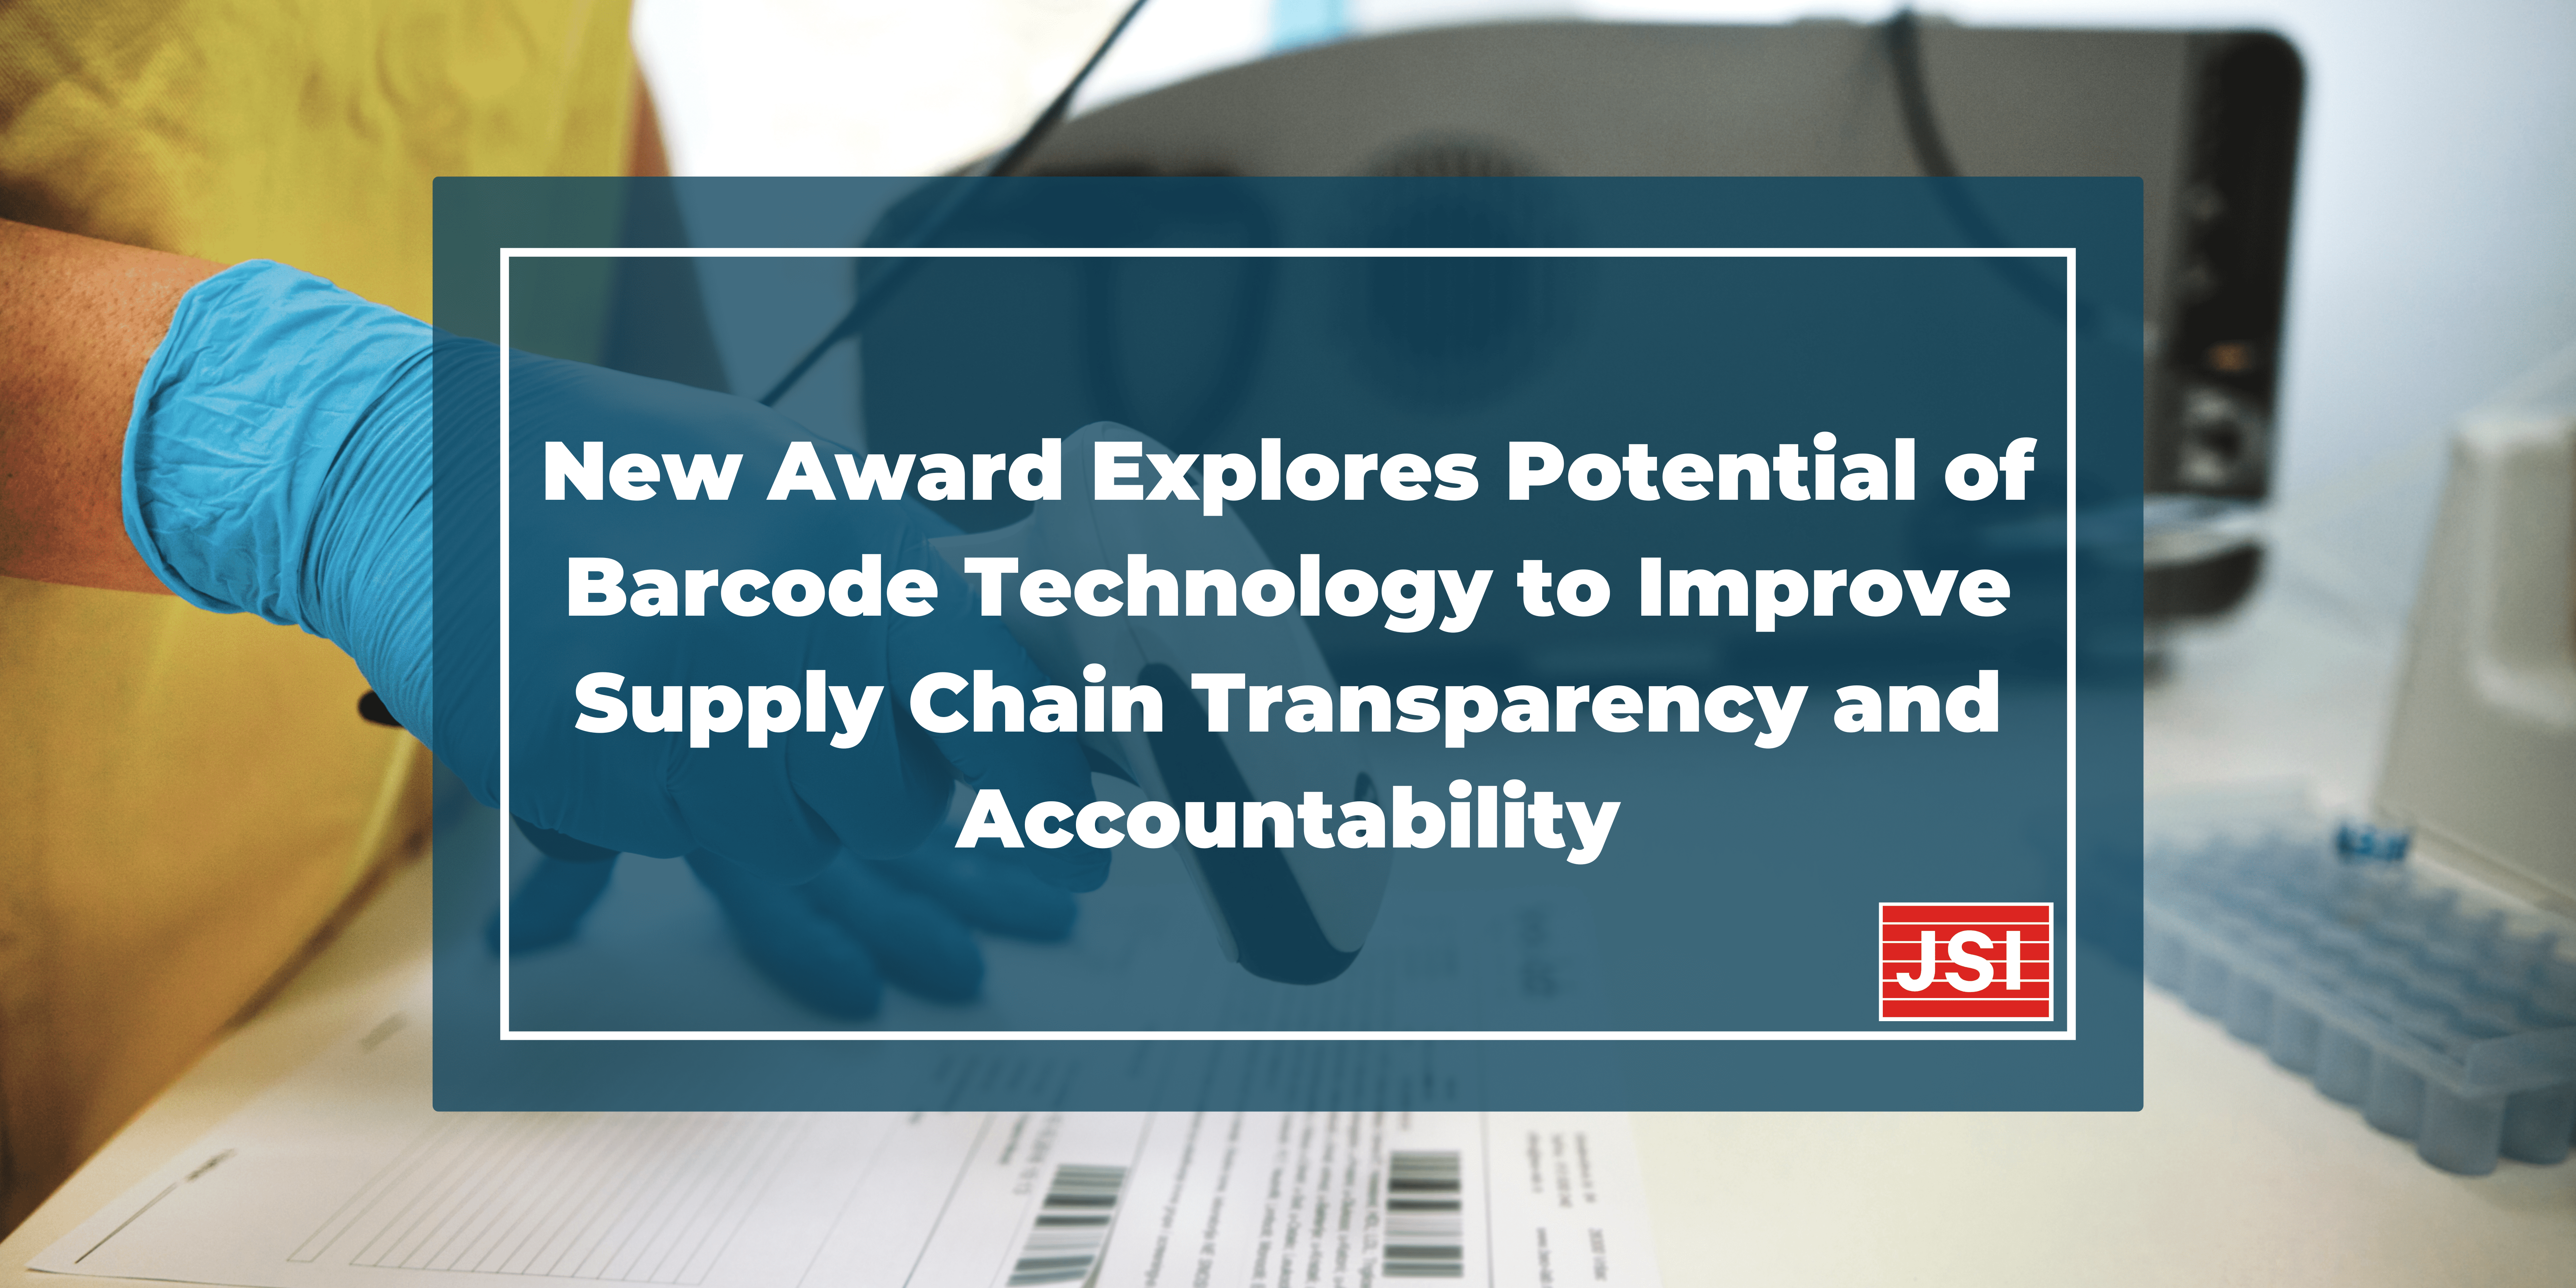 New Award Explores Potential of Barcode Technology to Improve Supply Chain Transparency and Accountability